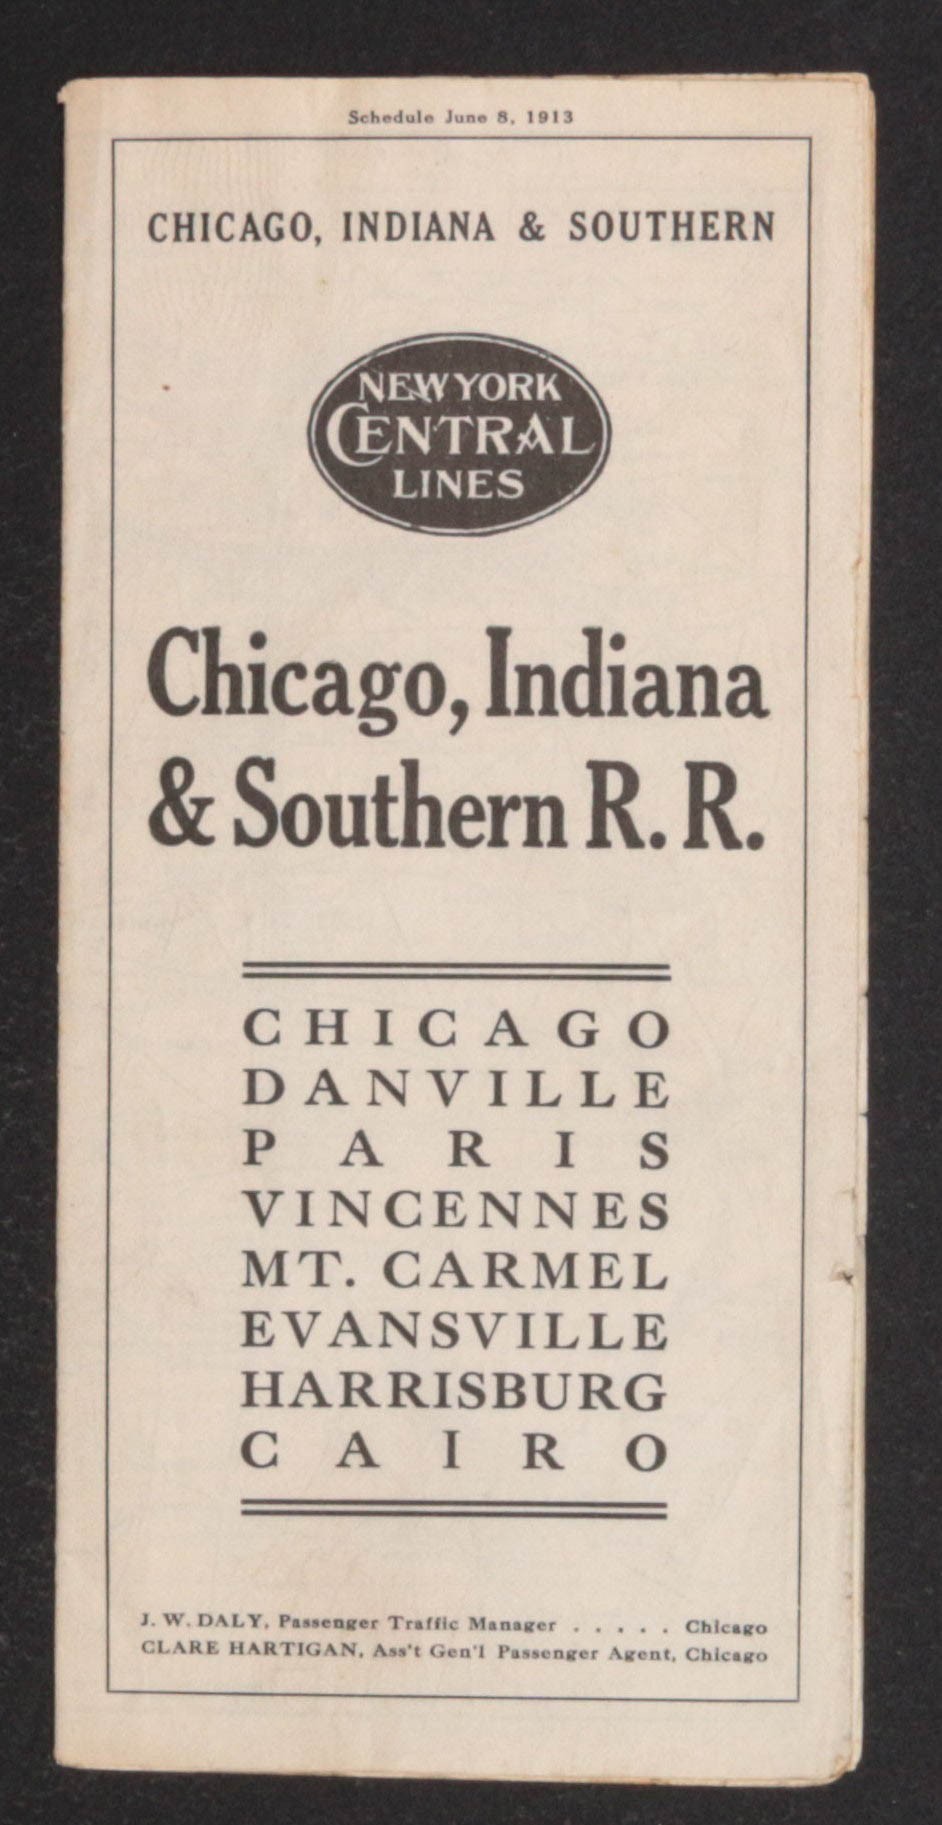 CHICAGO, INDIANA & SOUTHERN R.R. TIMETABLE FOR 1913